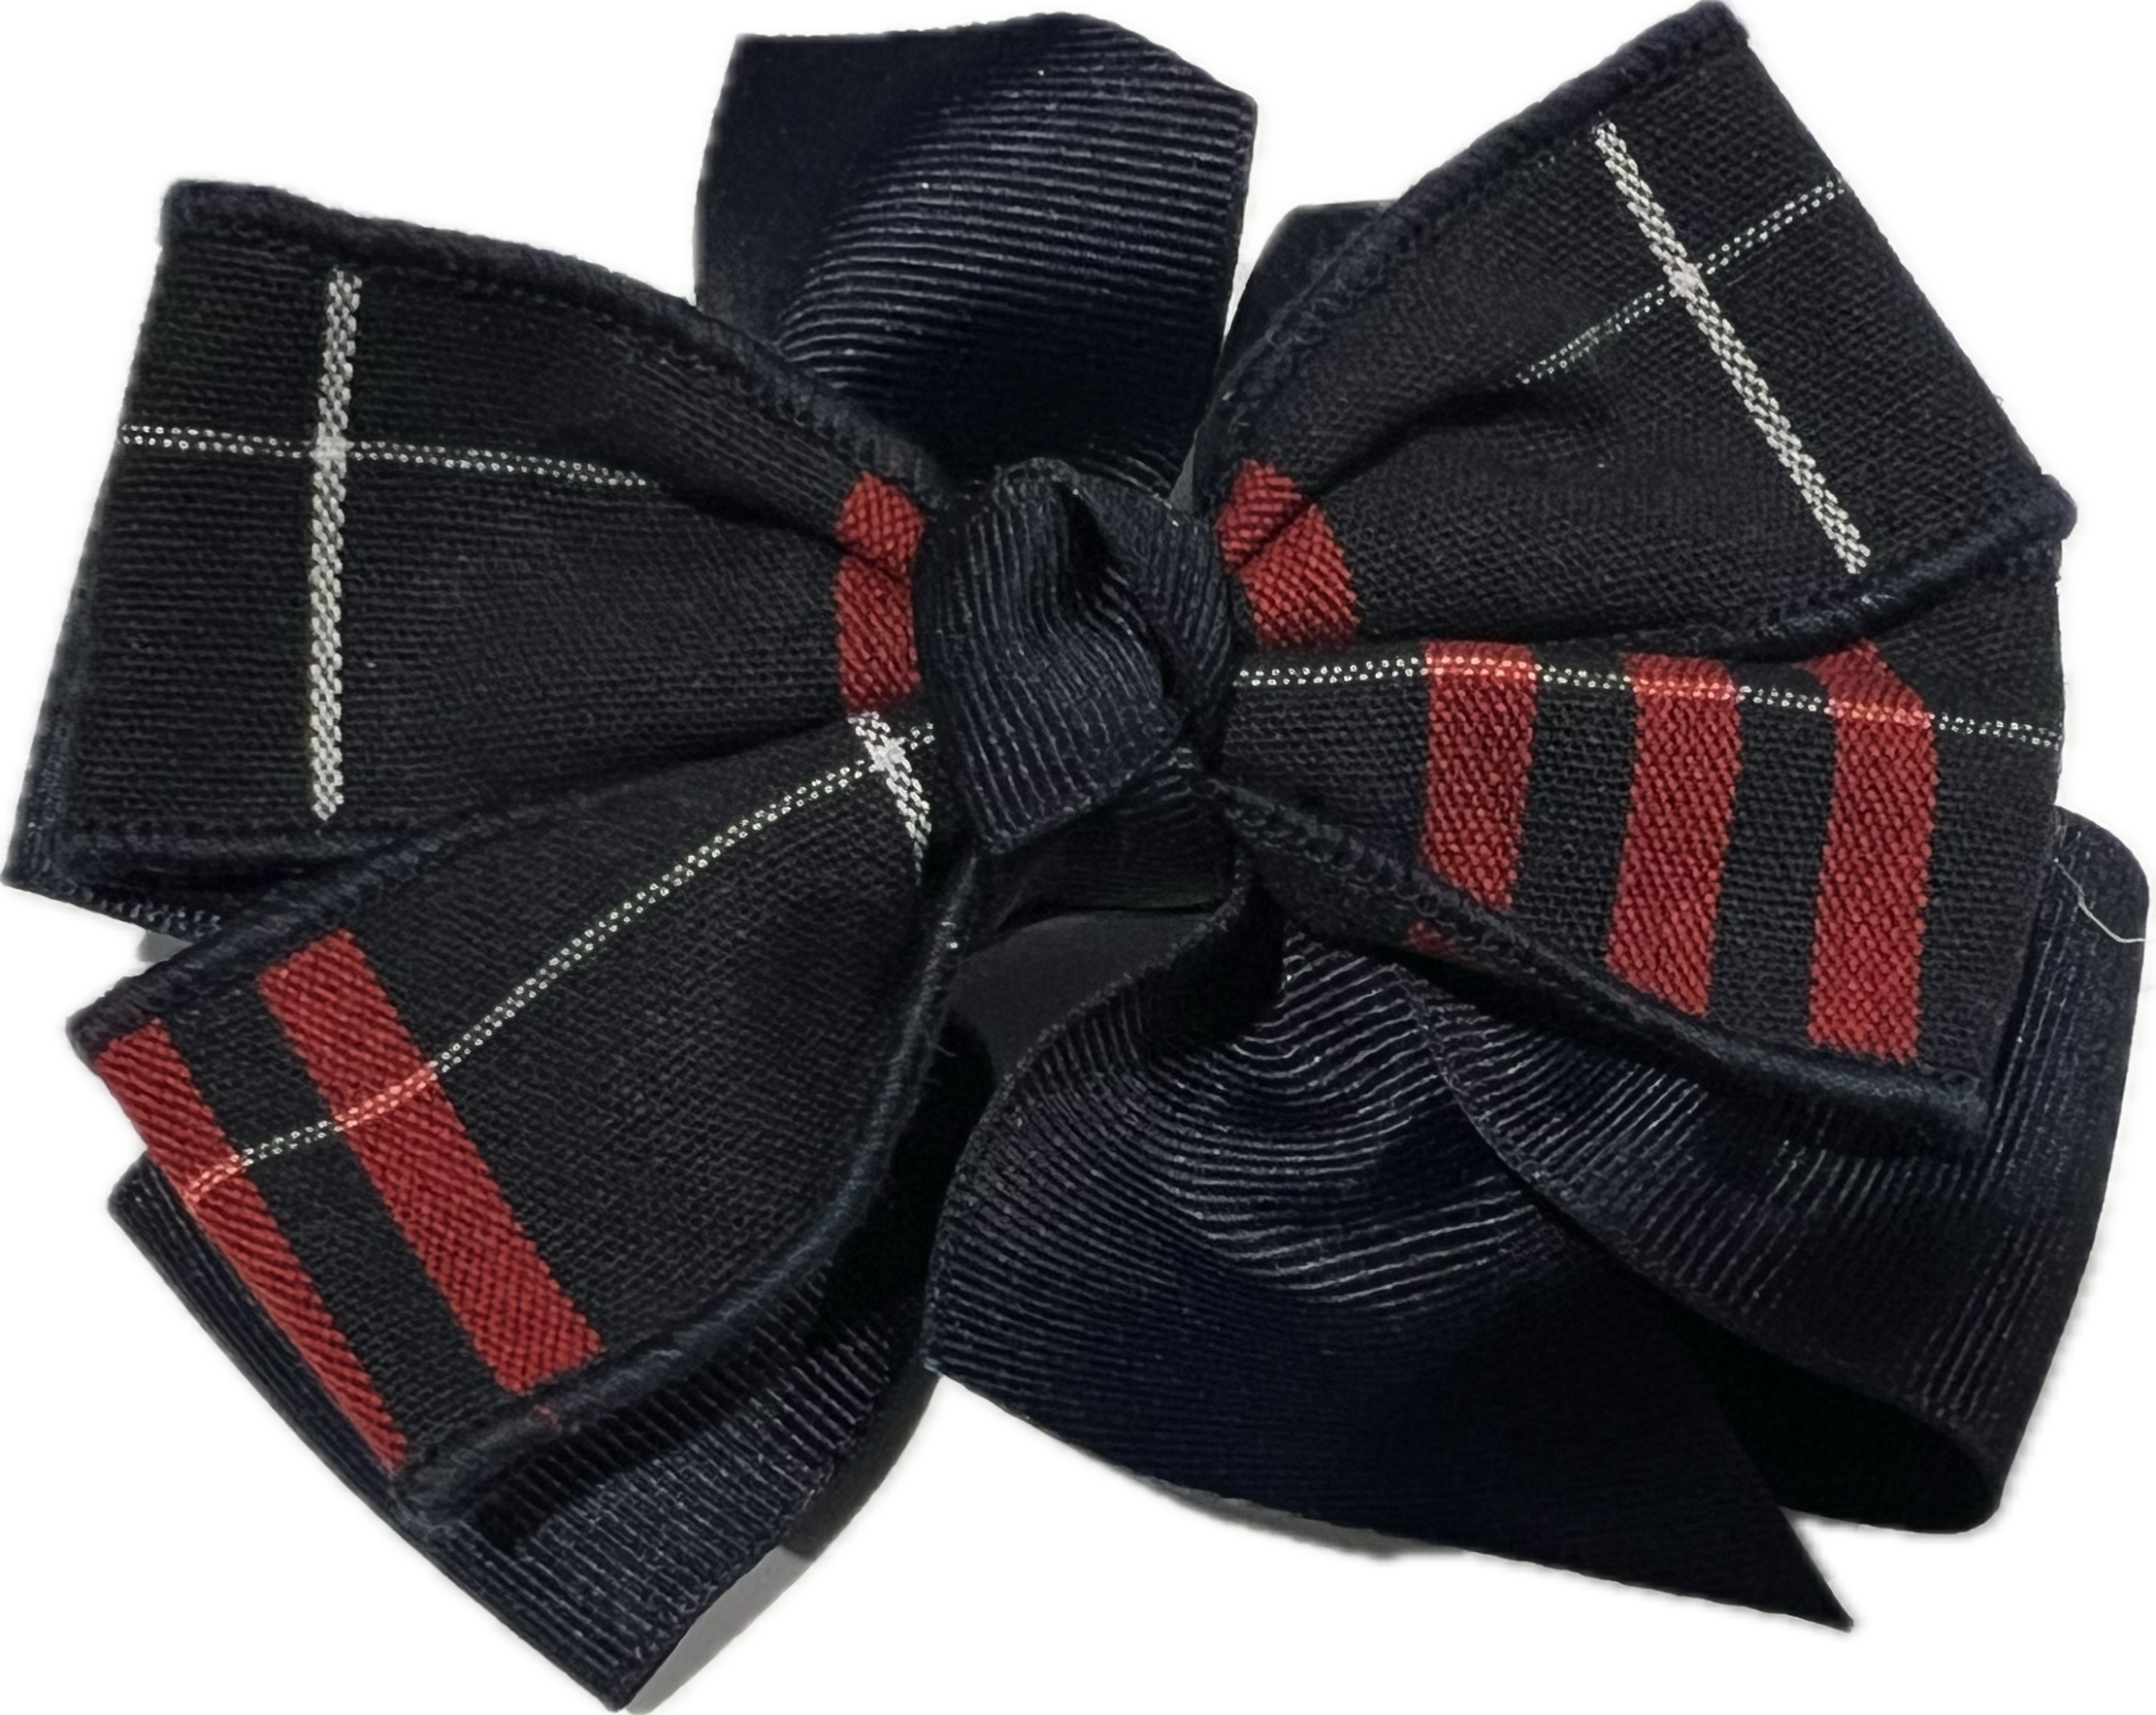 Plaid 37 Bow with Ribbon